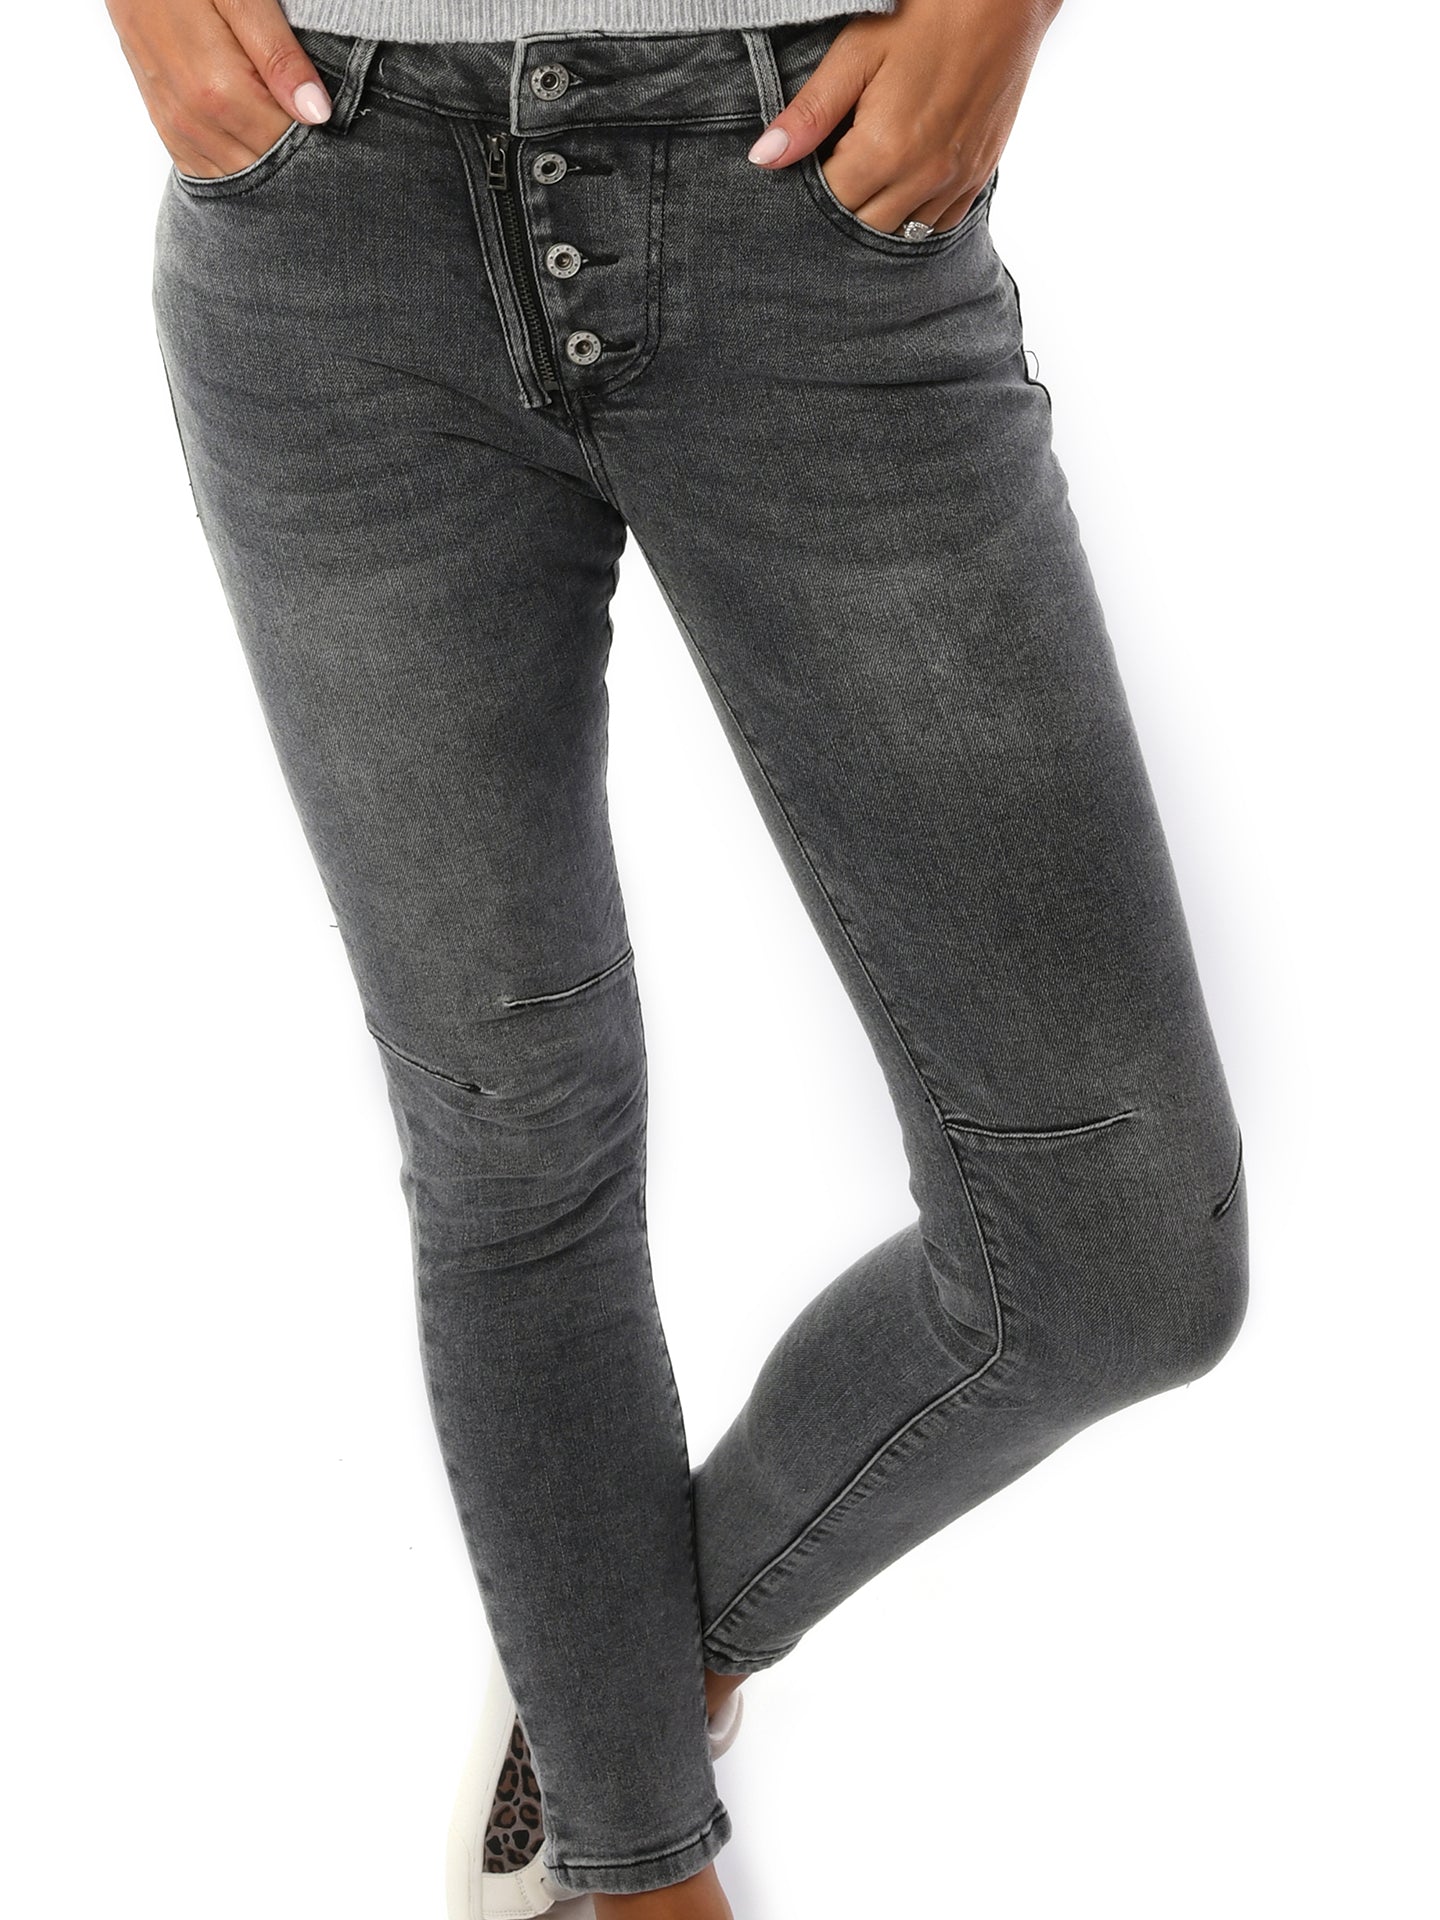 Mid-Rise Jeans - Grey Denim for sale - Woodcock and Cavendish